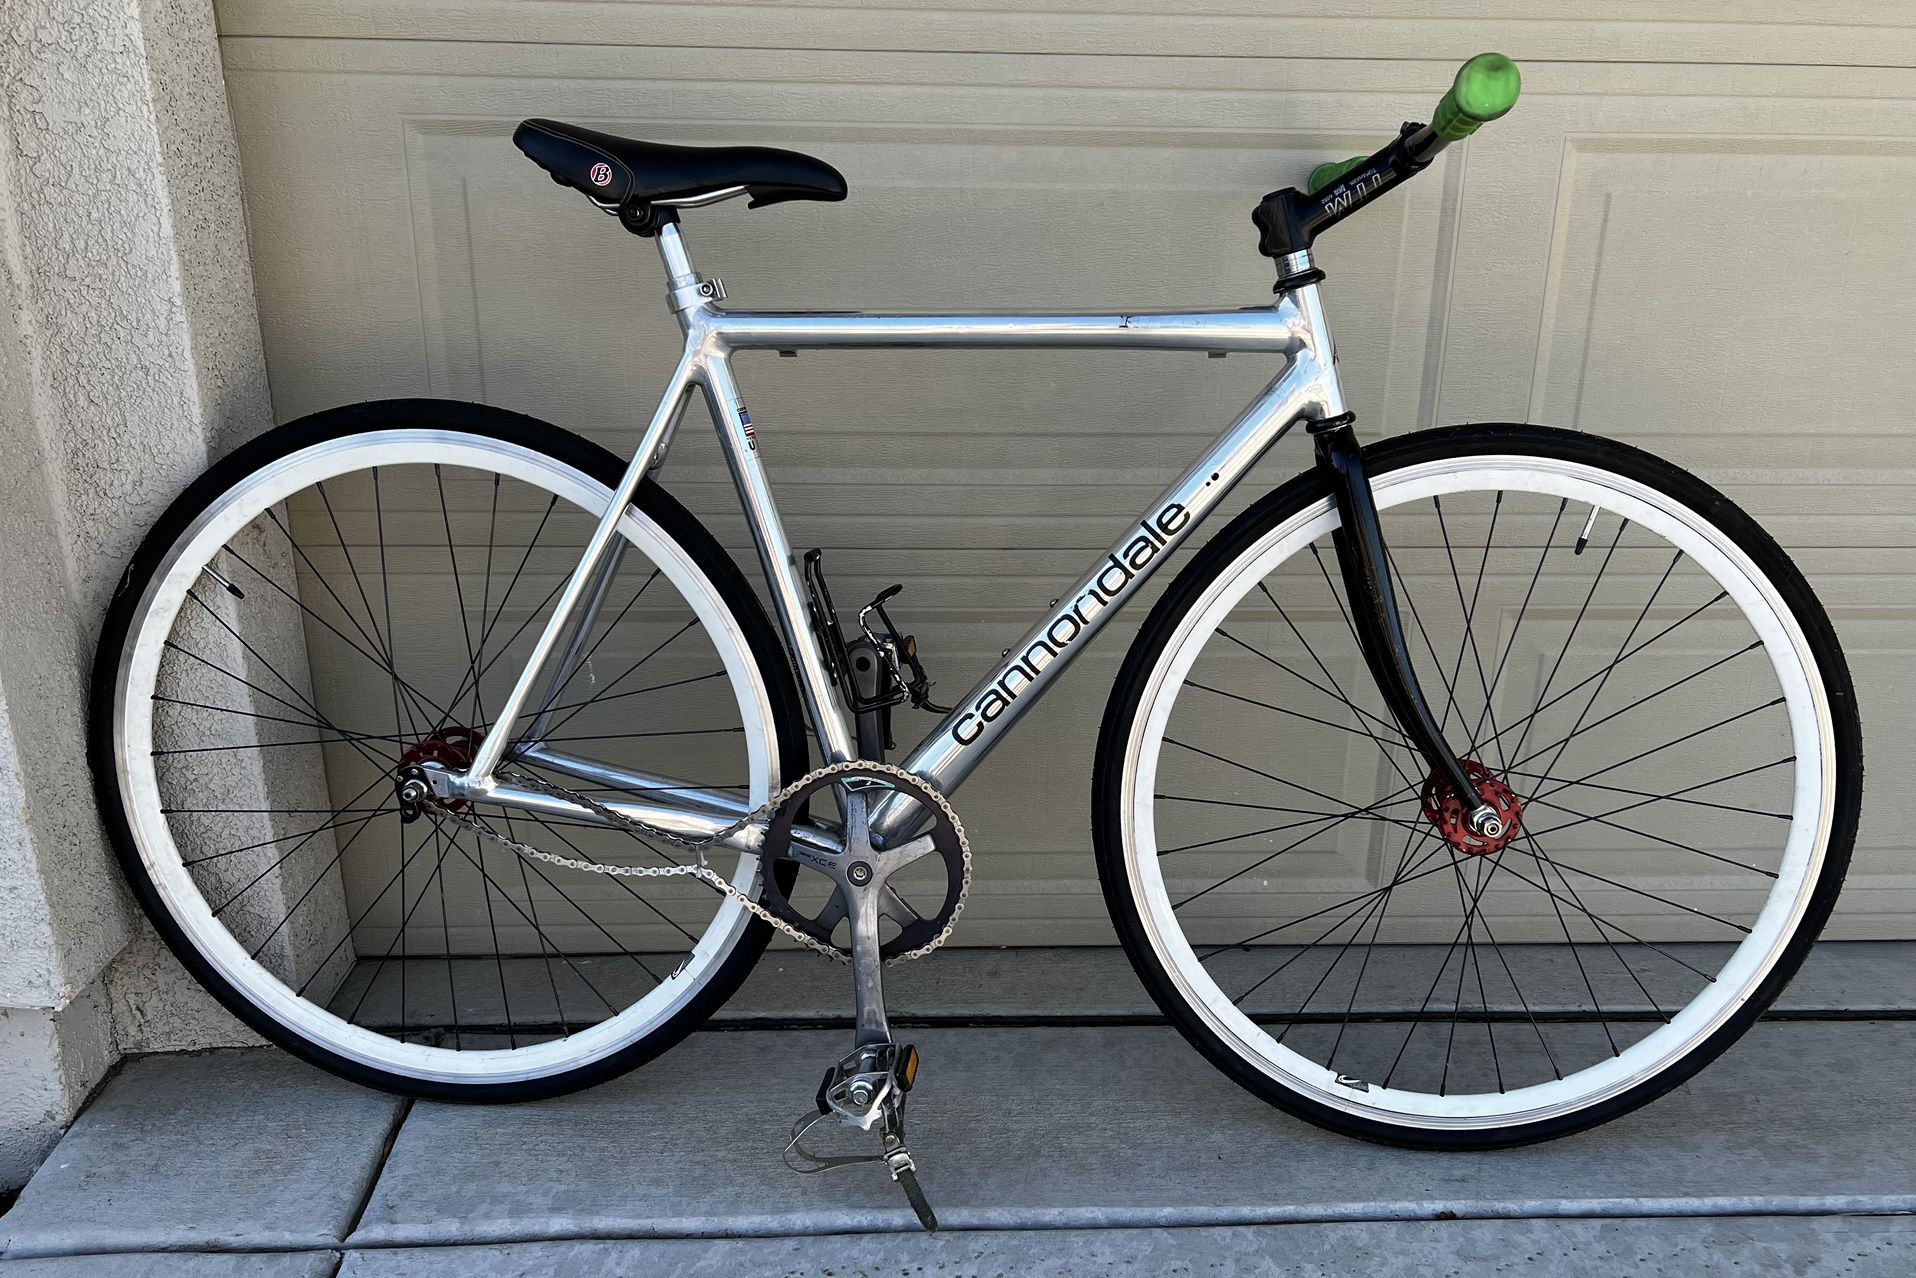 Cannonde R900 - Non-Runner Parts Project Bike - Aluminum Finish - 52cm - Fixie project -$100 OBO